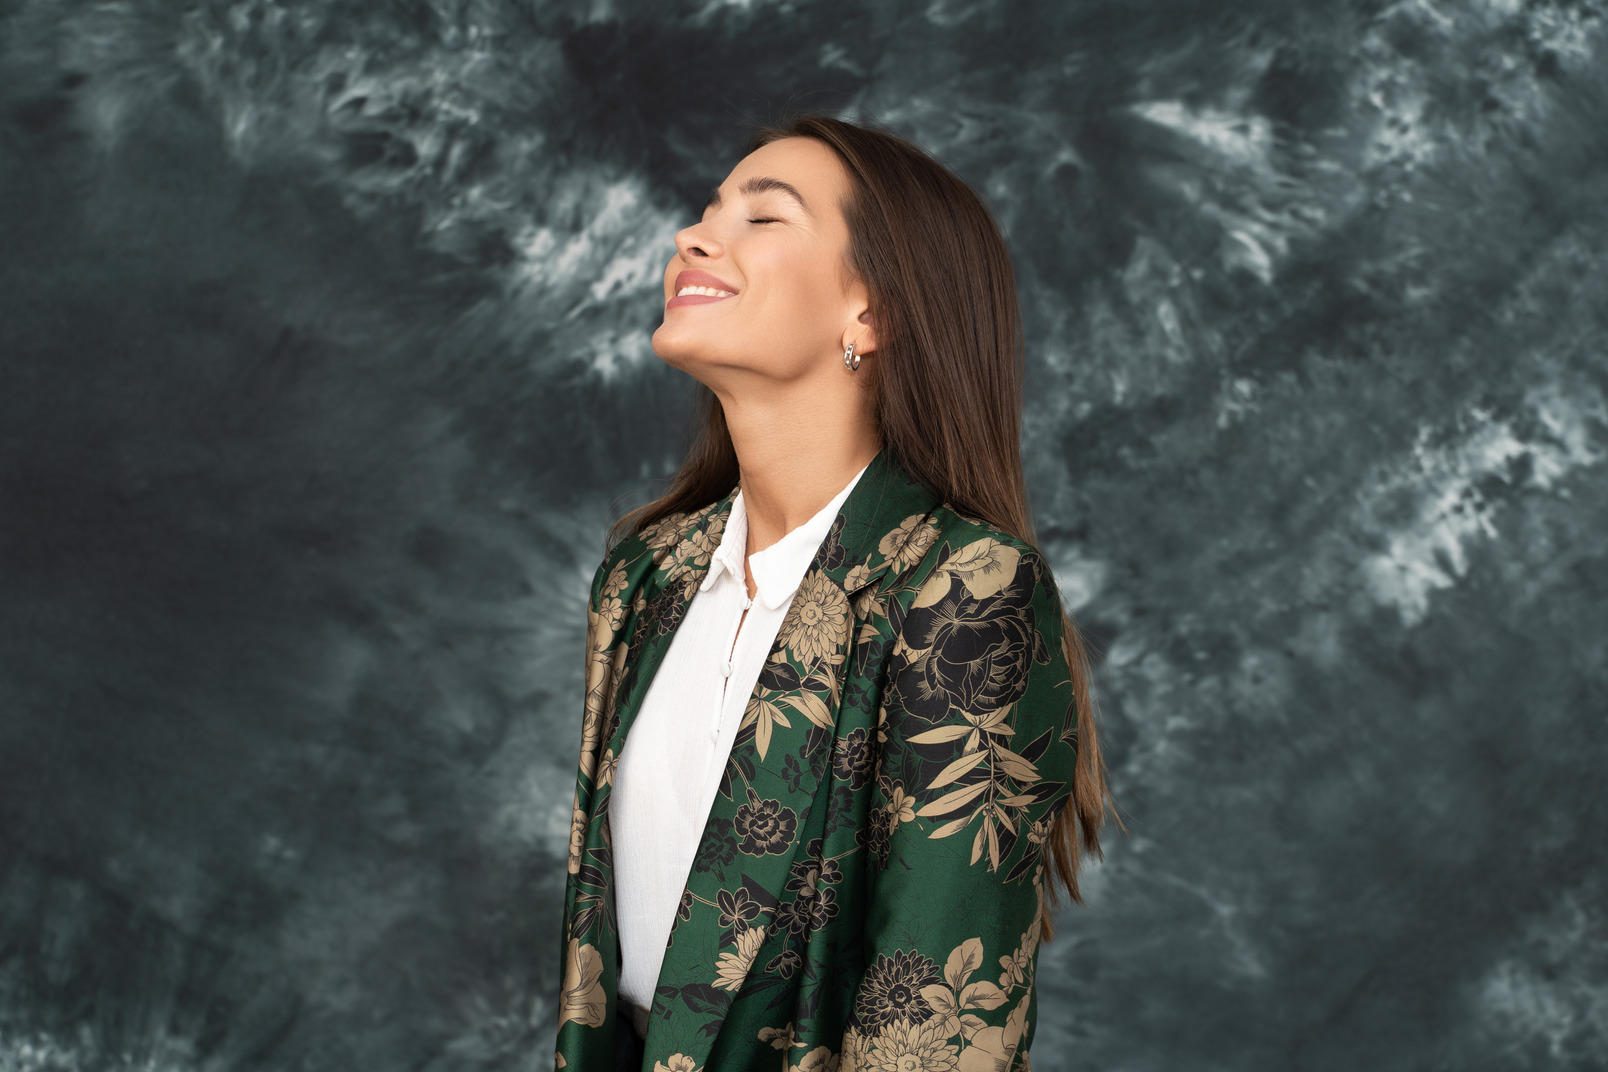 Three-quarter view of a woman in green japanese jacket smiling widely with her eyes closed